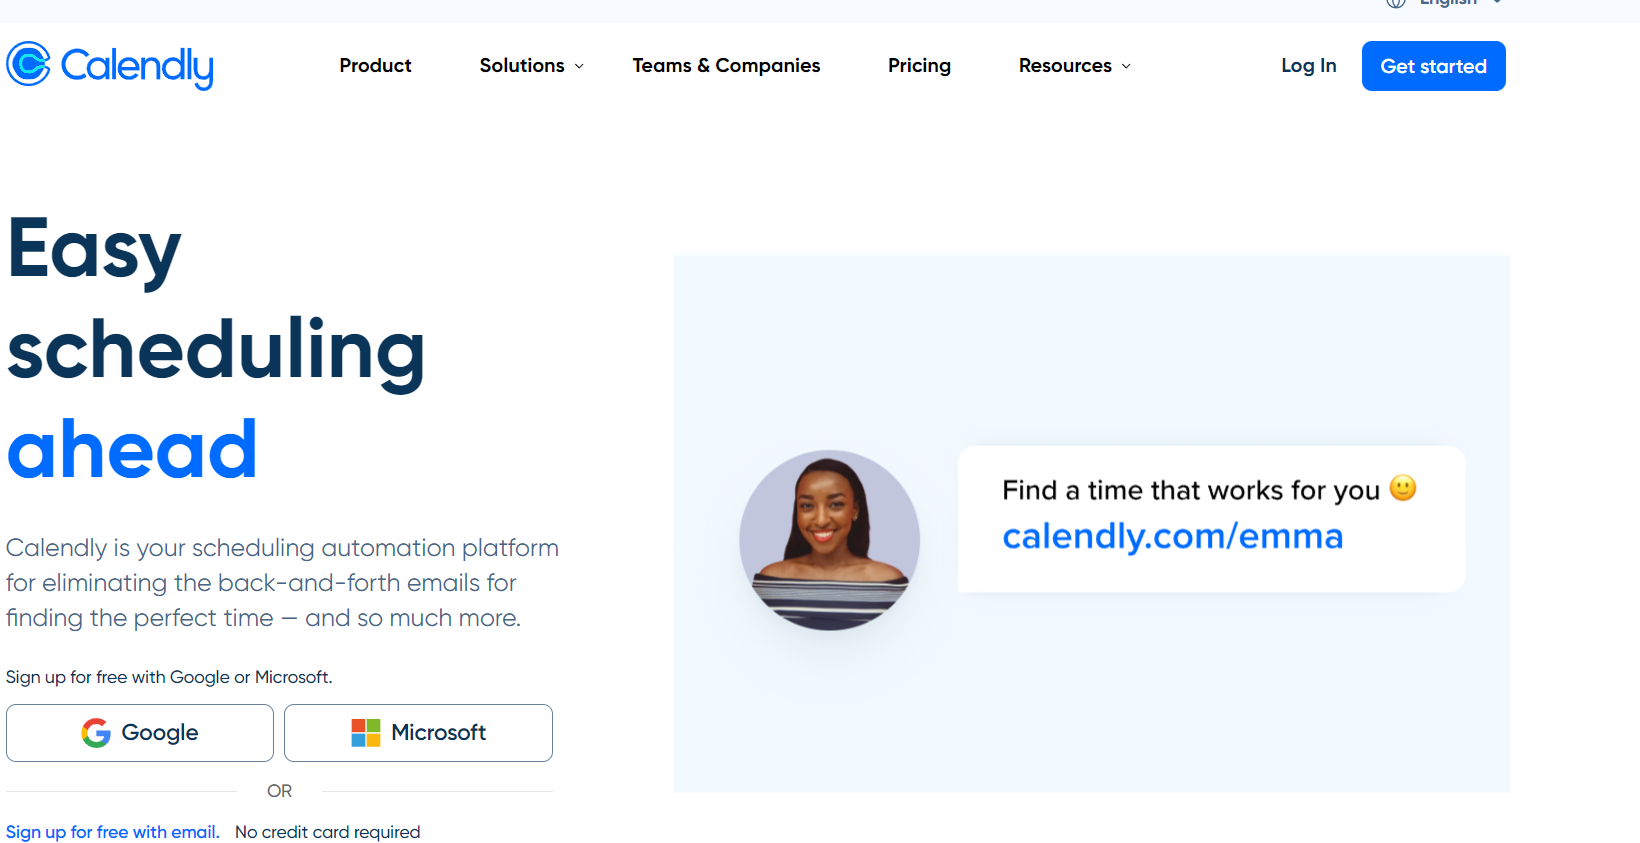 Calendly scheduling automation platform